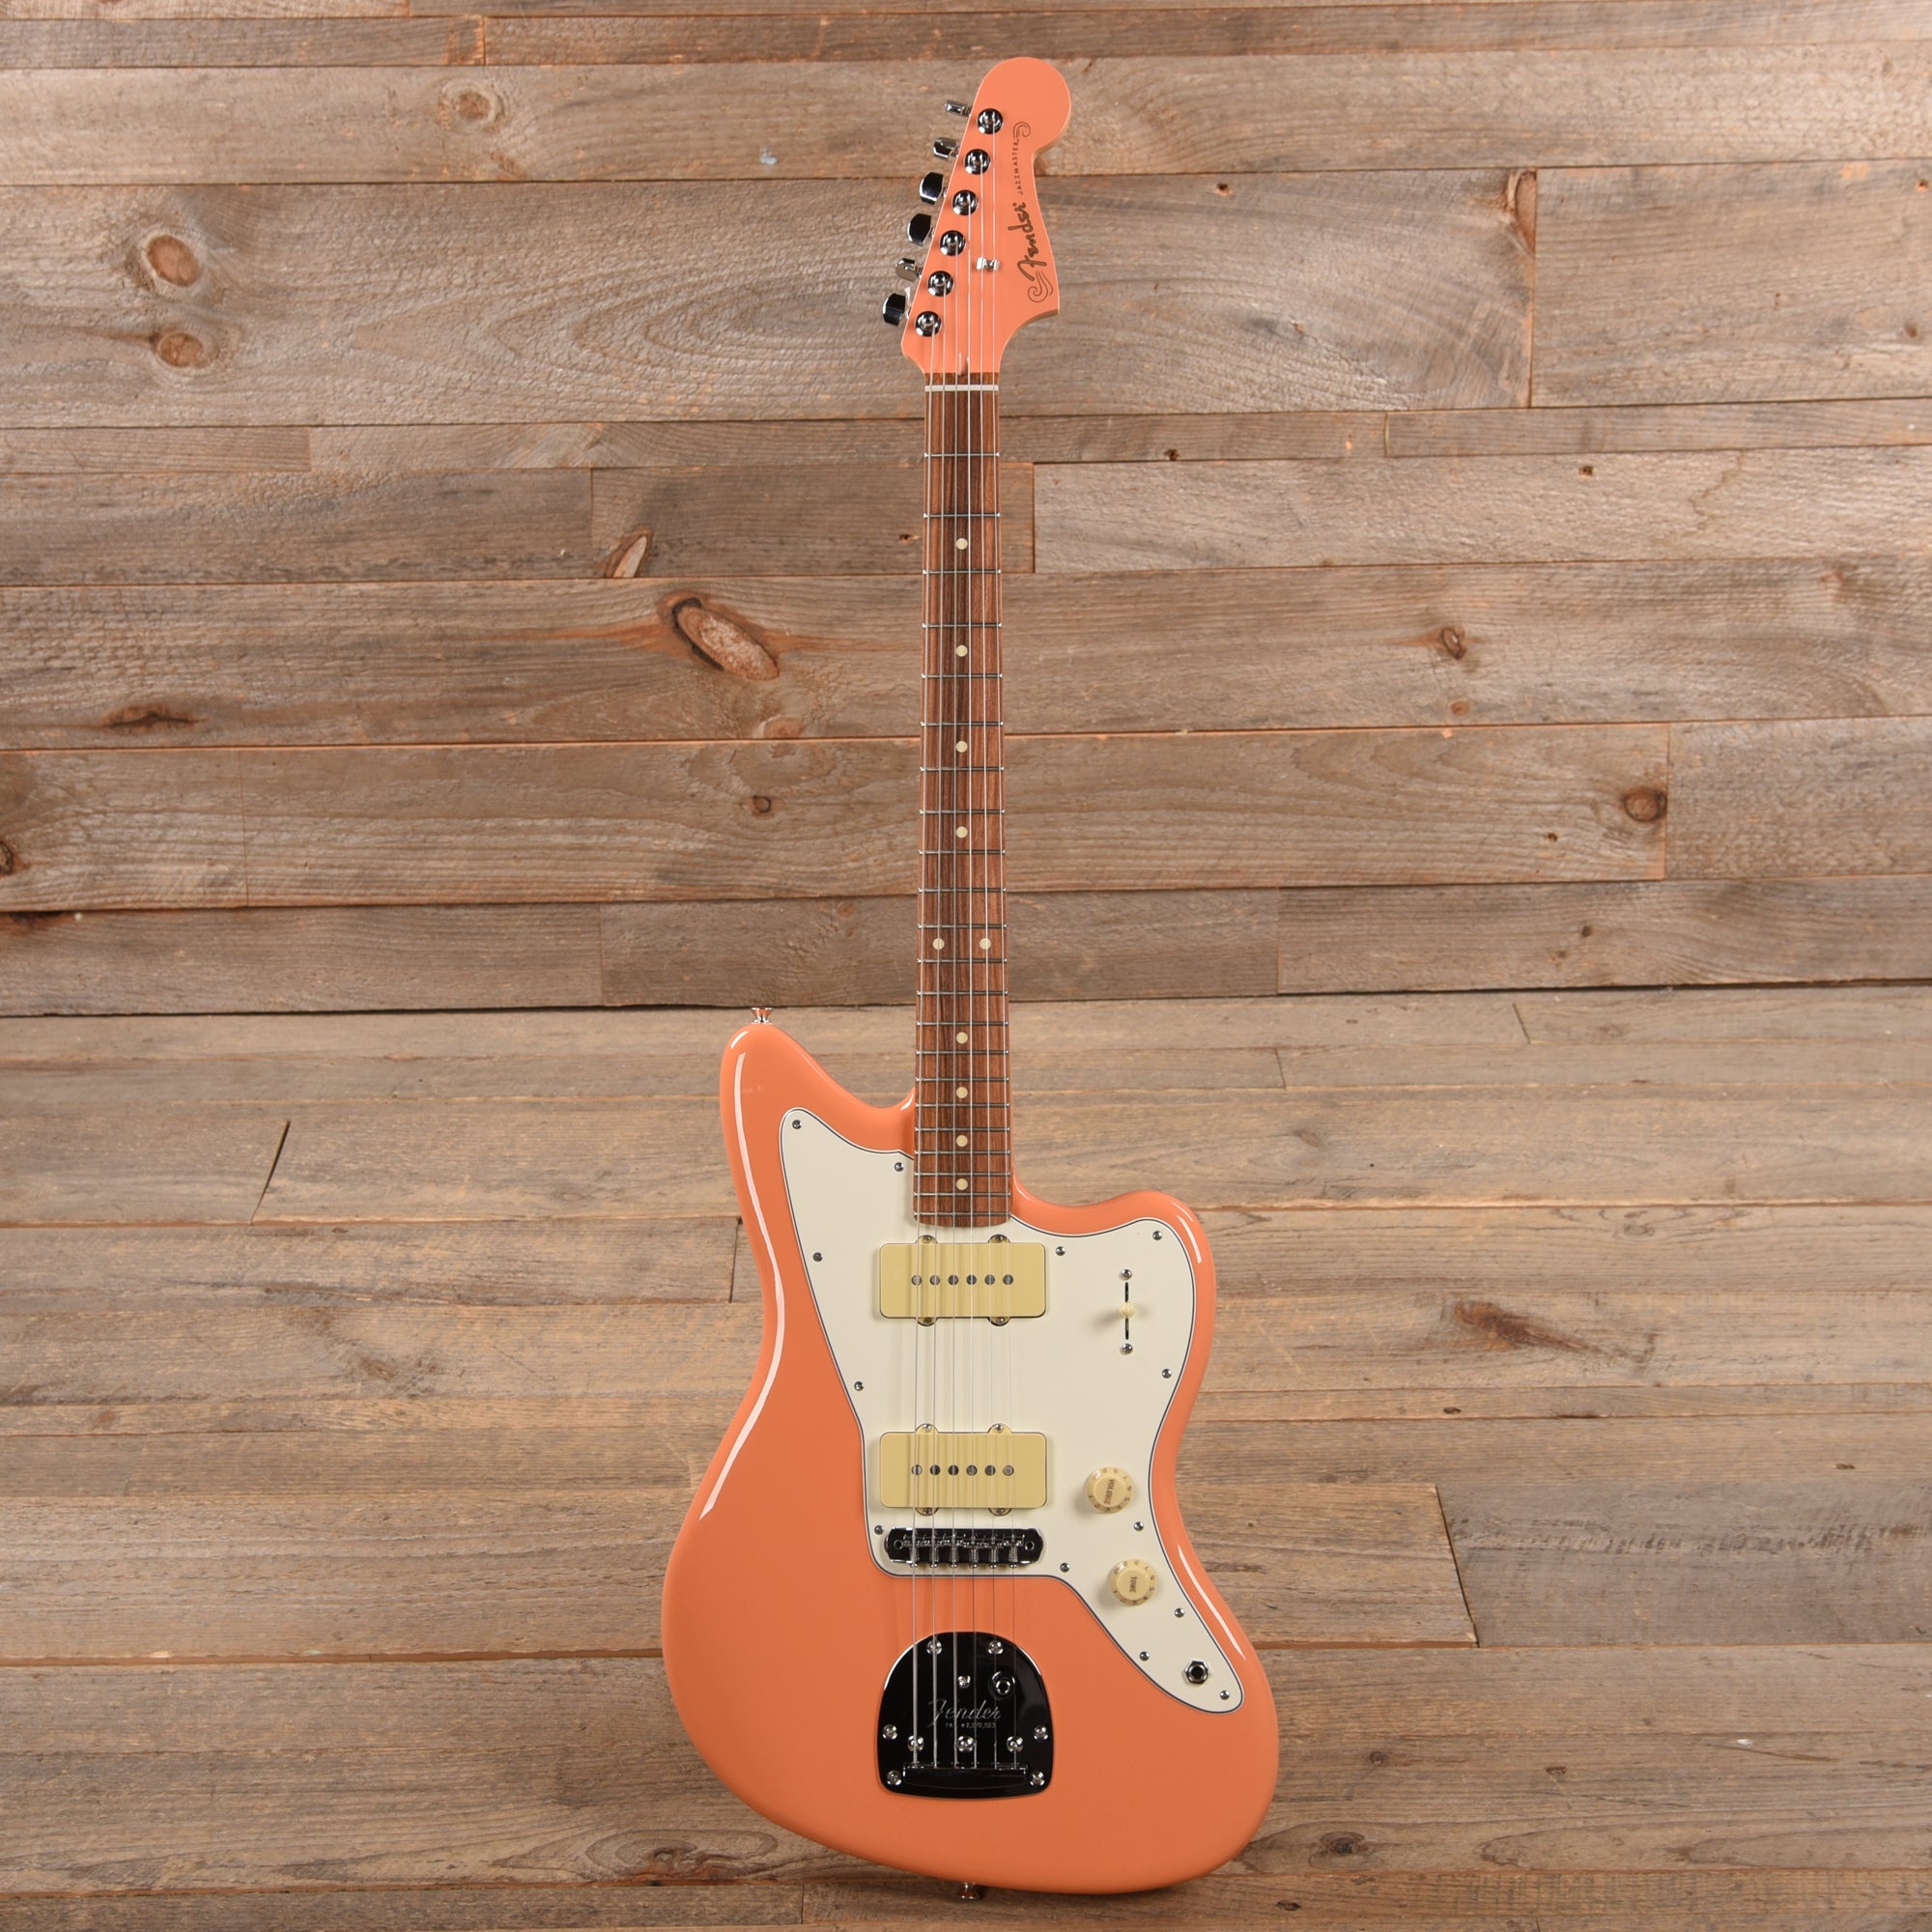 Fender Player Jazzmaster Pacific Peach w/Matching Headcap, Pure Vintage '65 Pickups, & Series/Parallel 4-Way